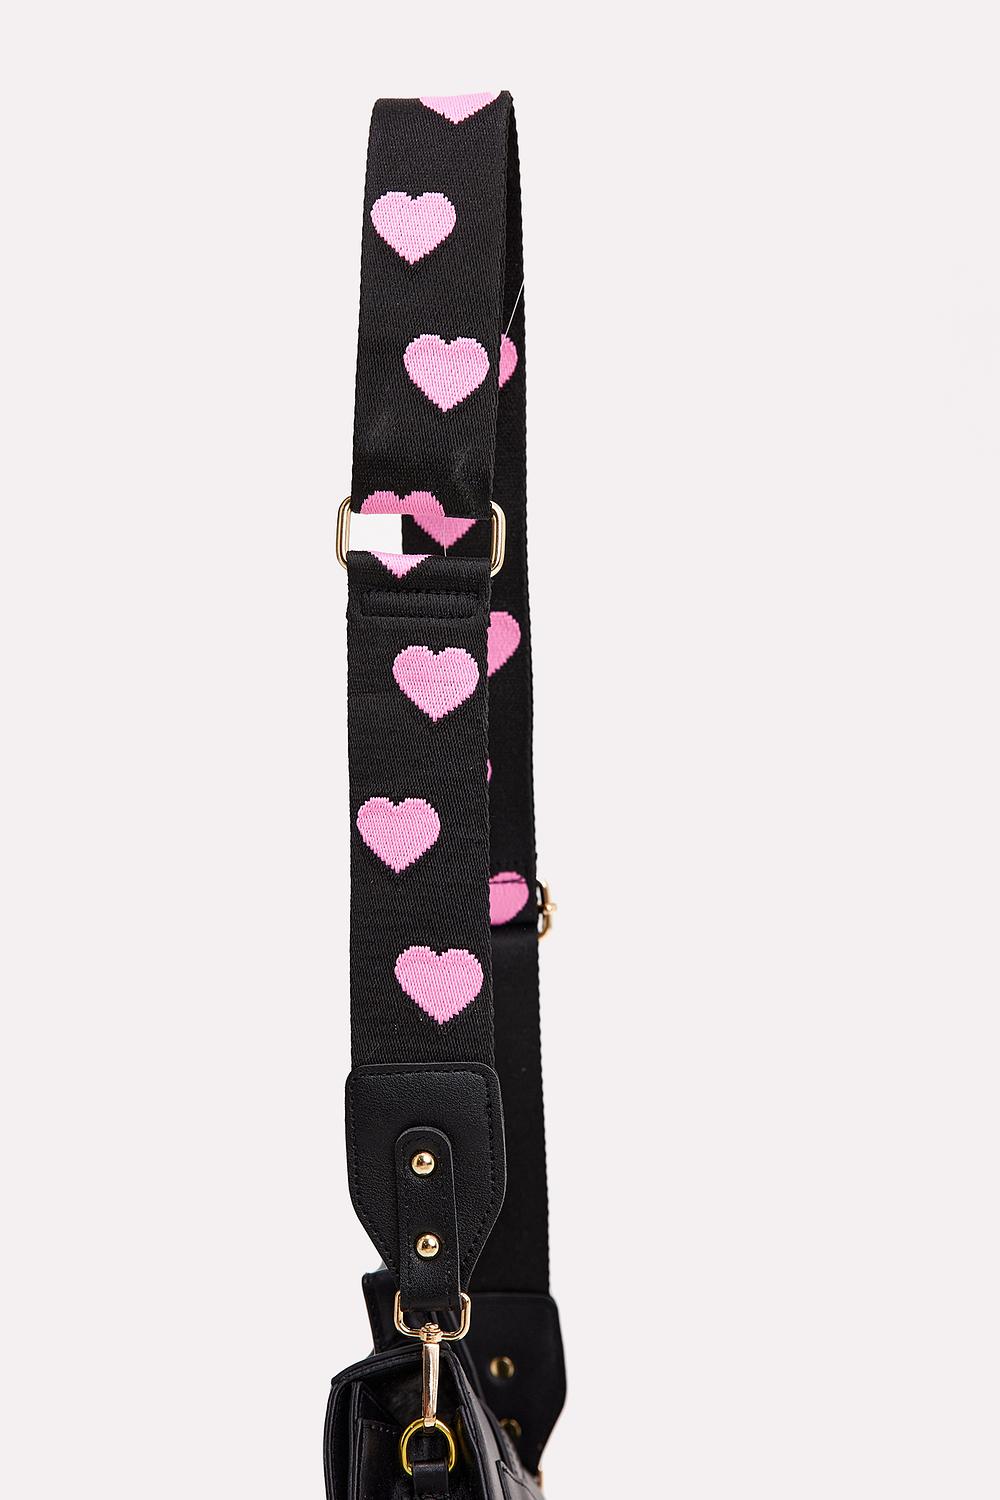 Black bag strap with heart print